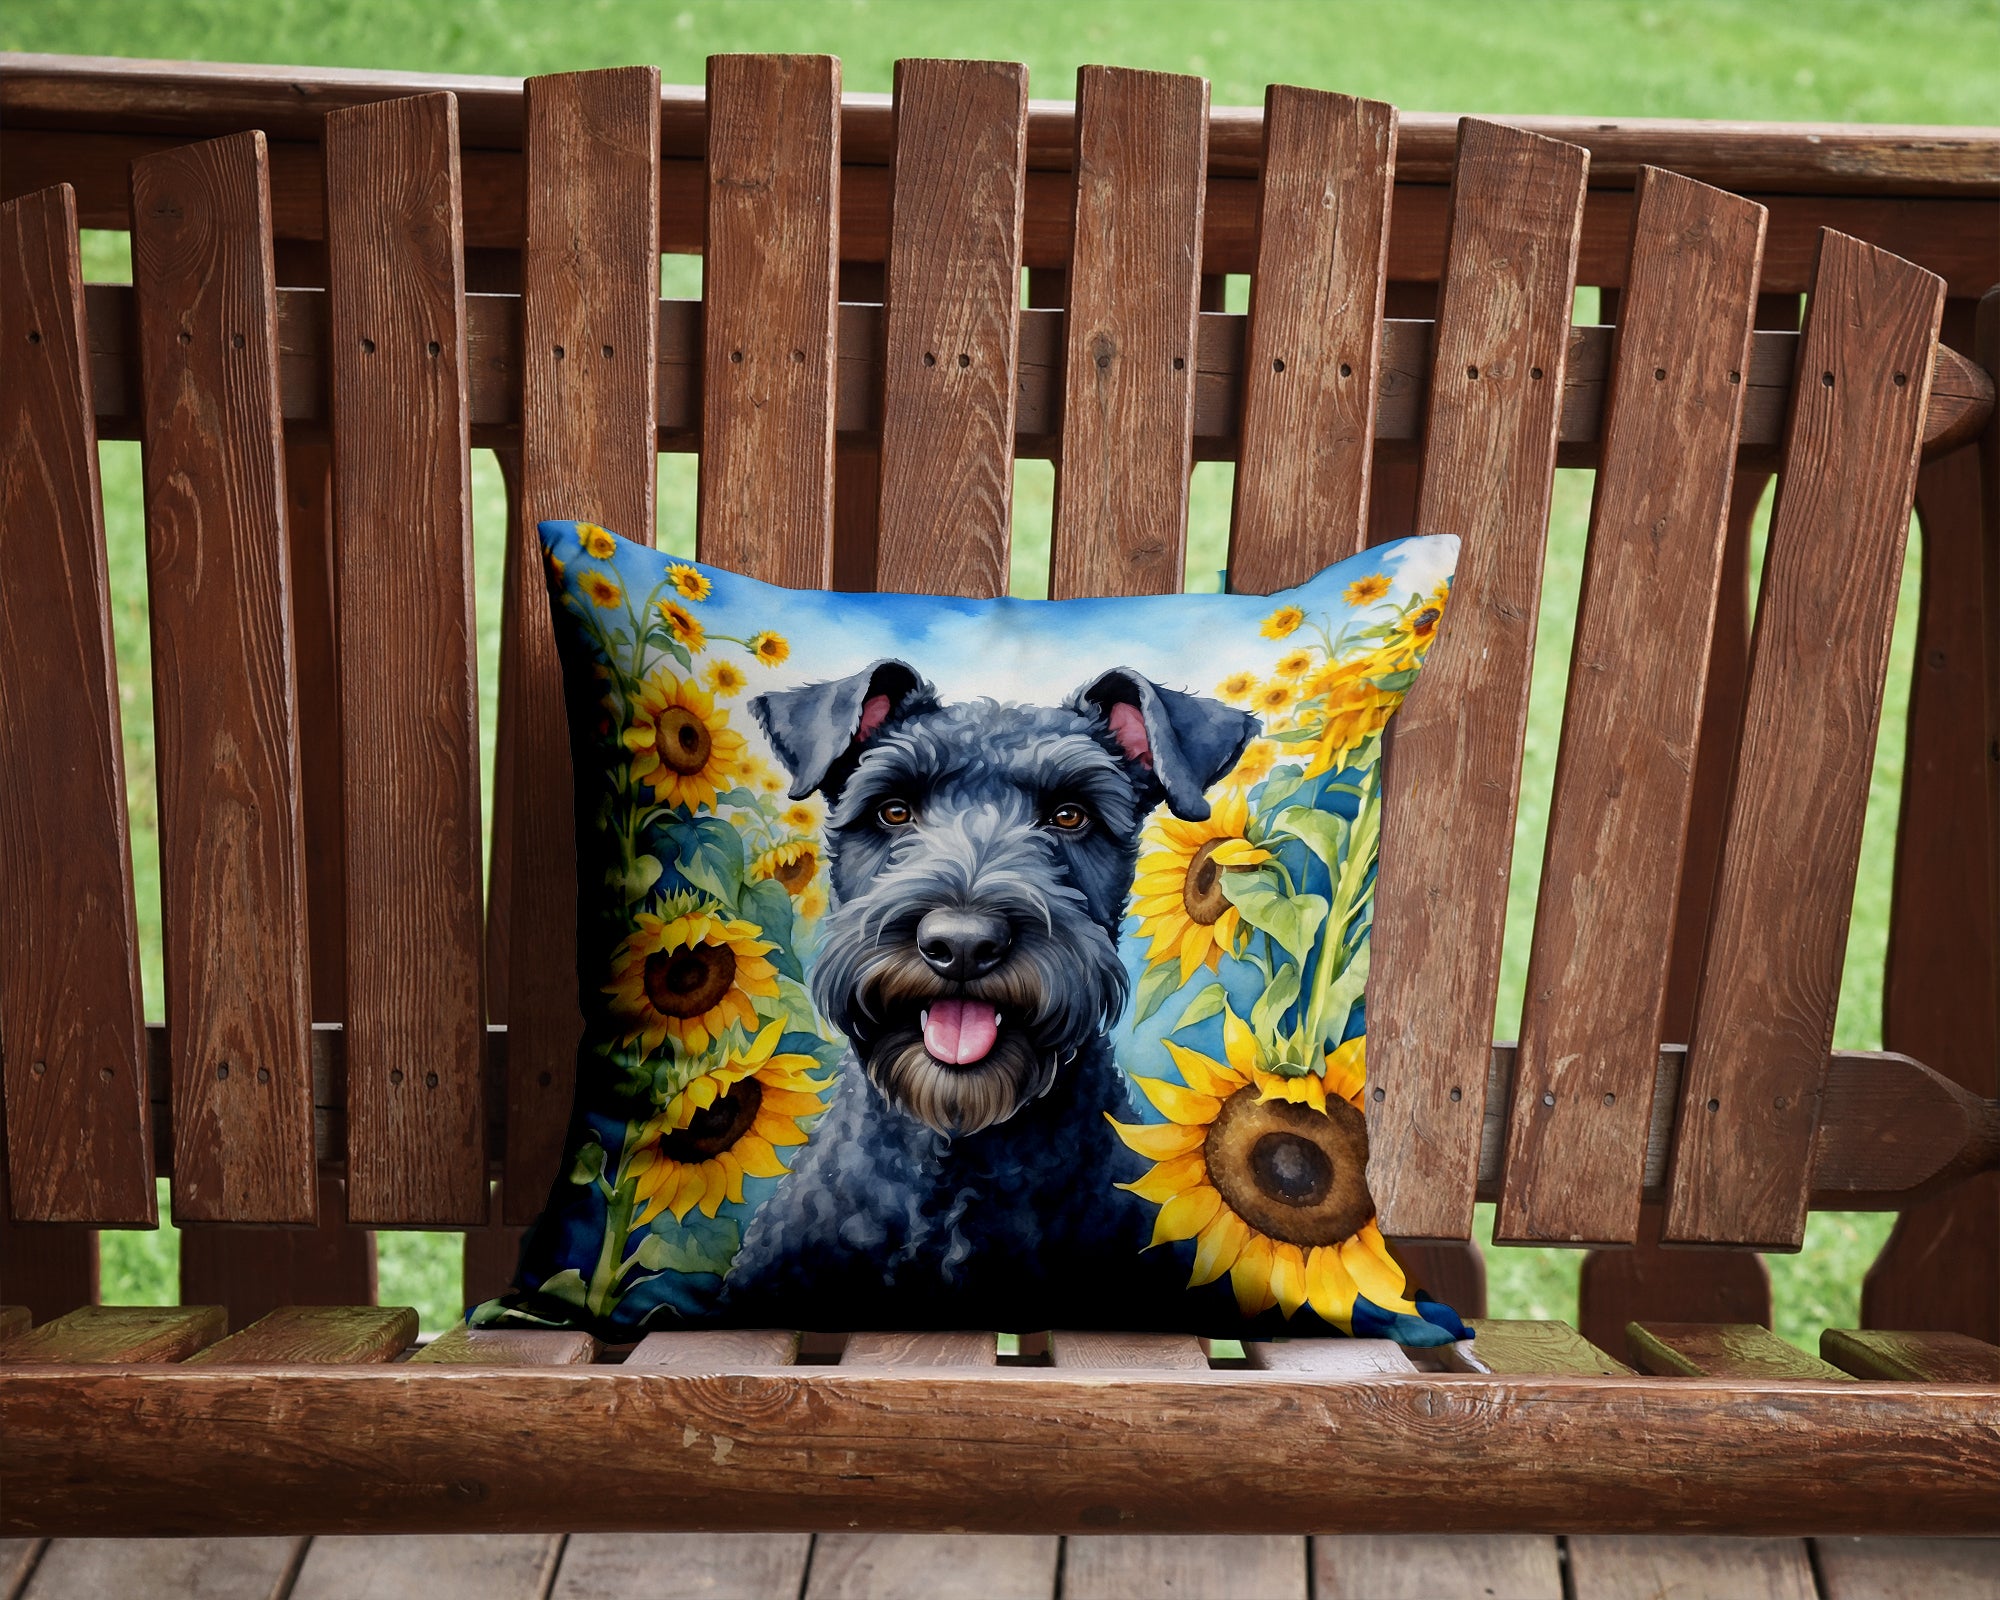 Buy this Kerry Blue Terrier in Sunflowers Throw Pillow